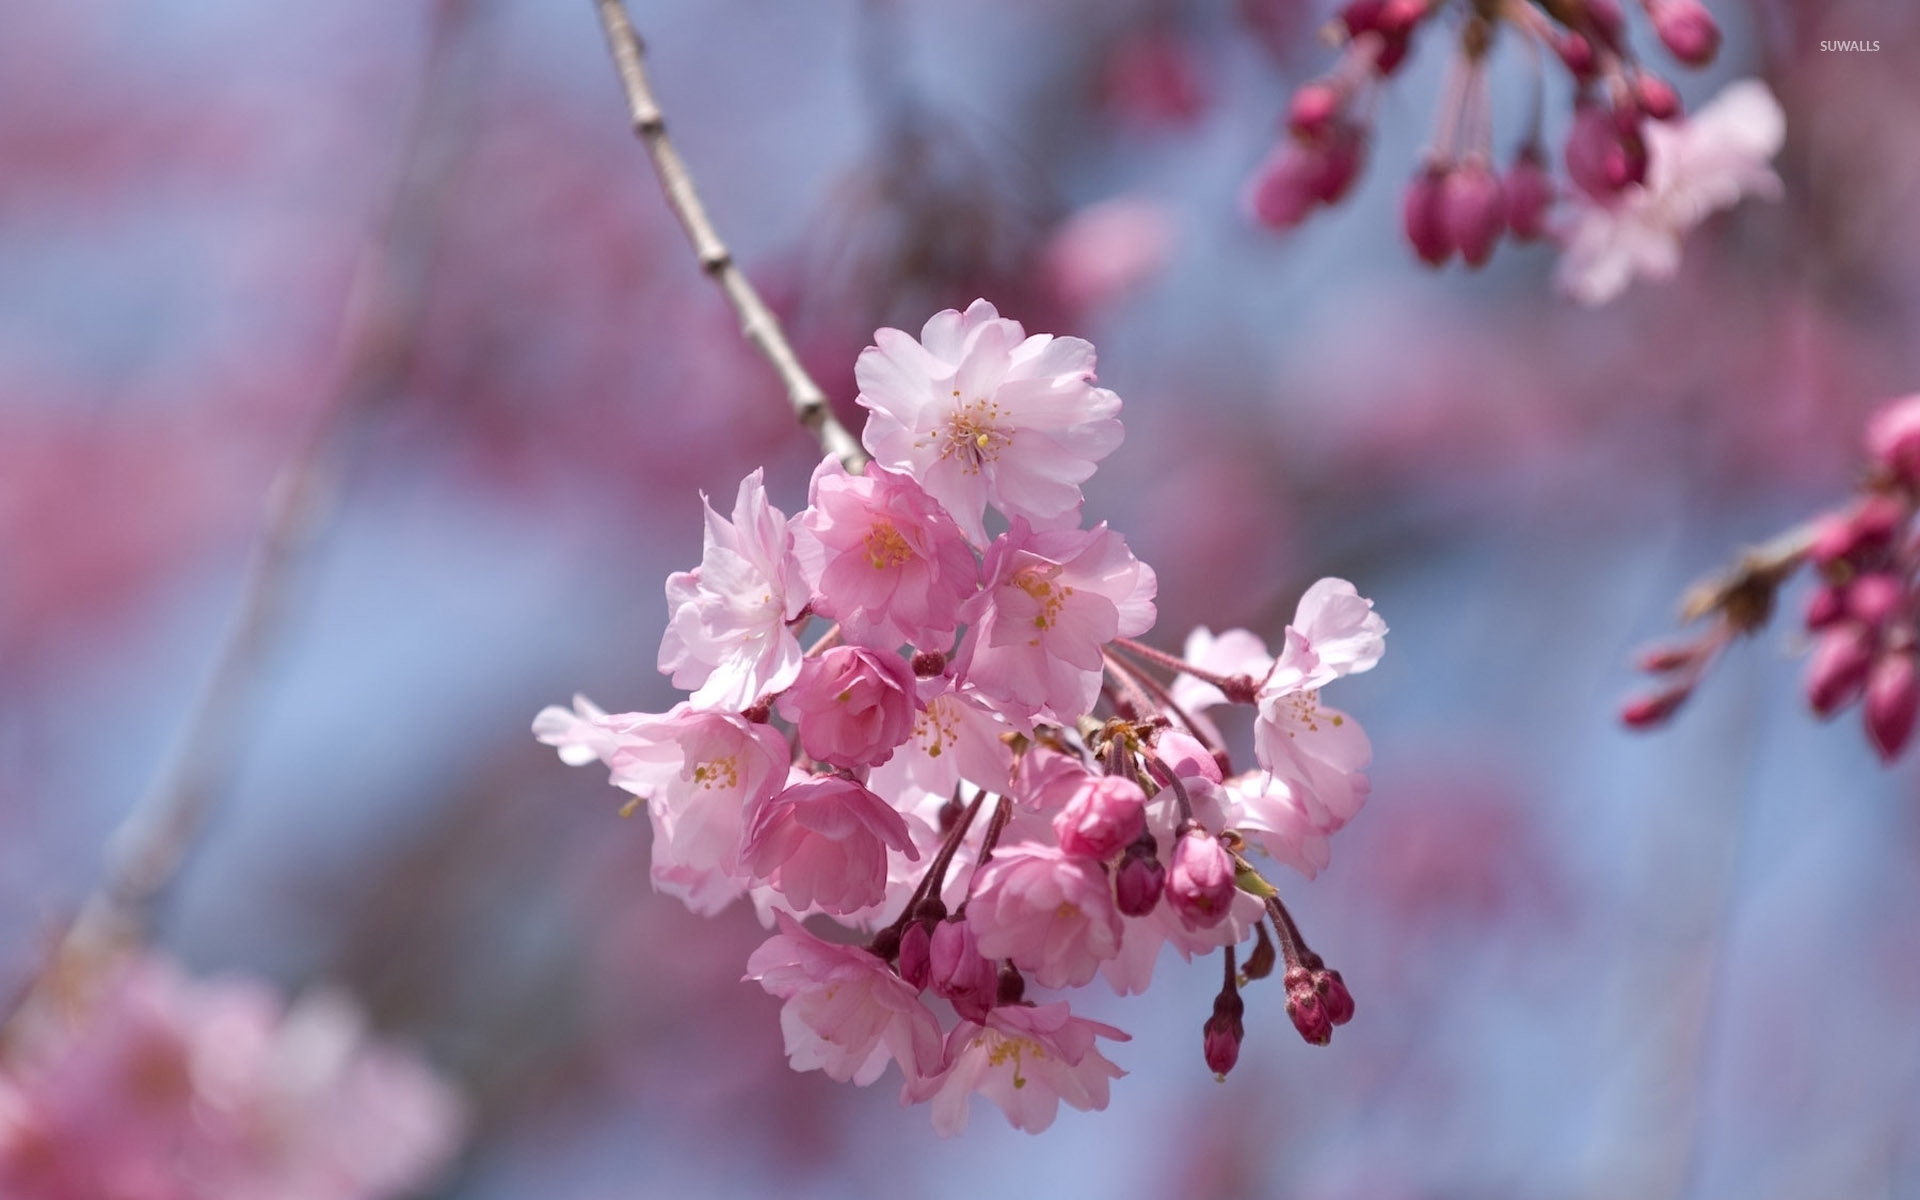 Pink cherry blossoms in a spring tree wallpaper - Flower wallpapers ...